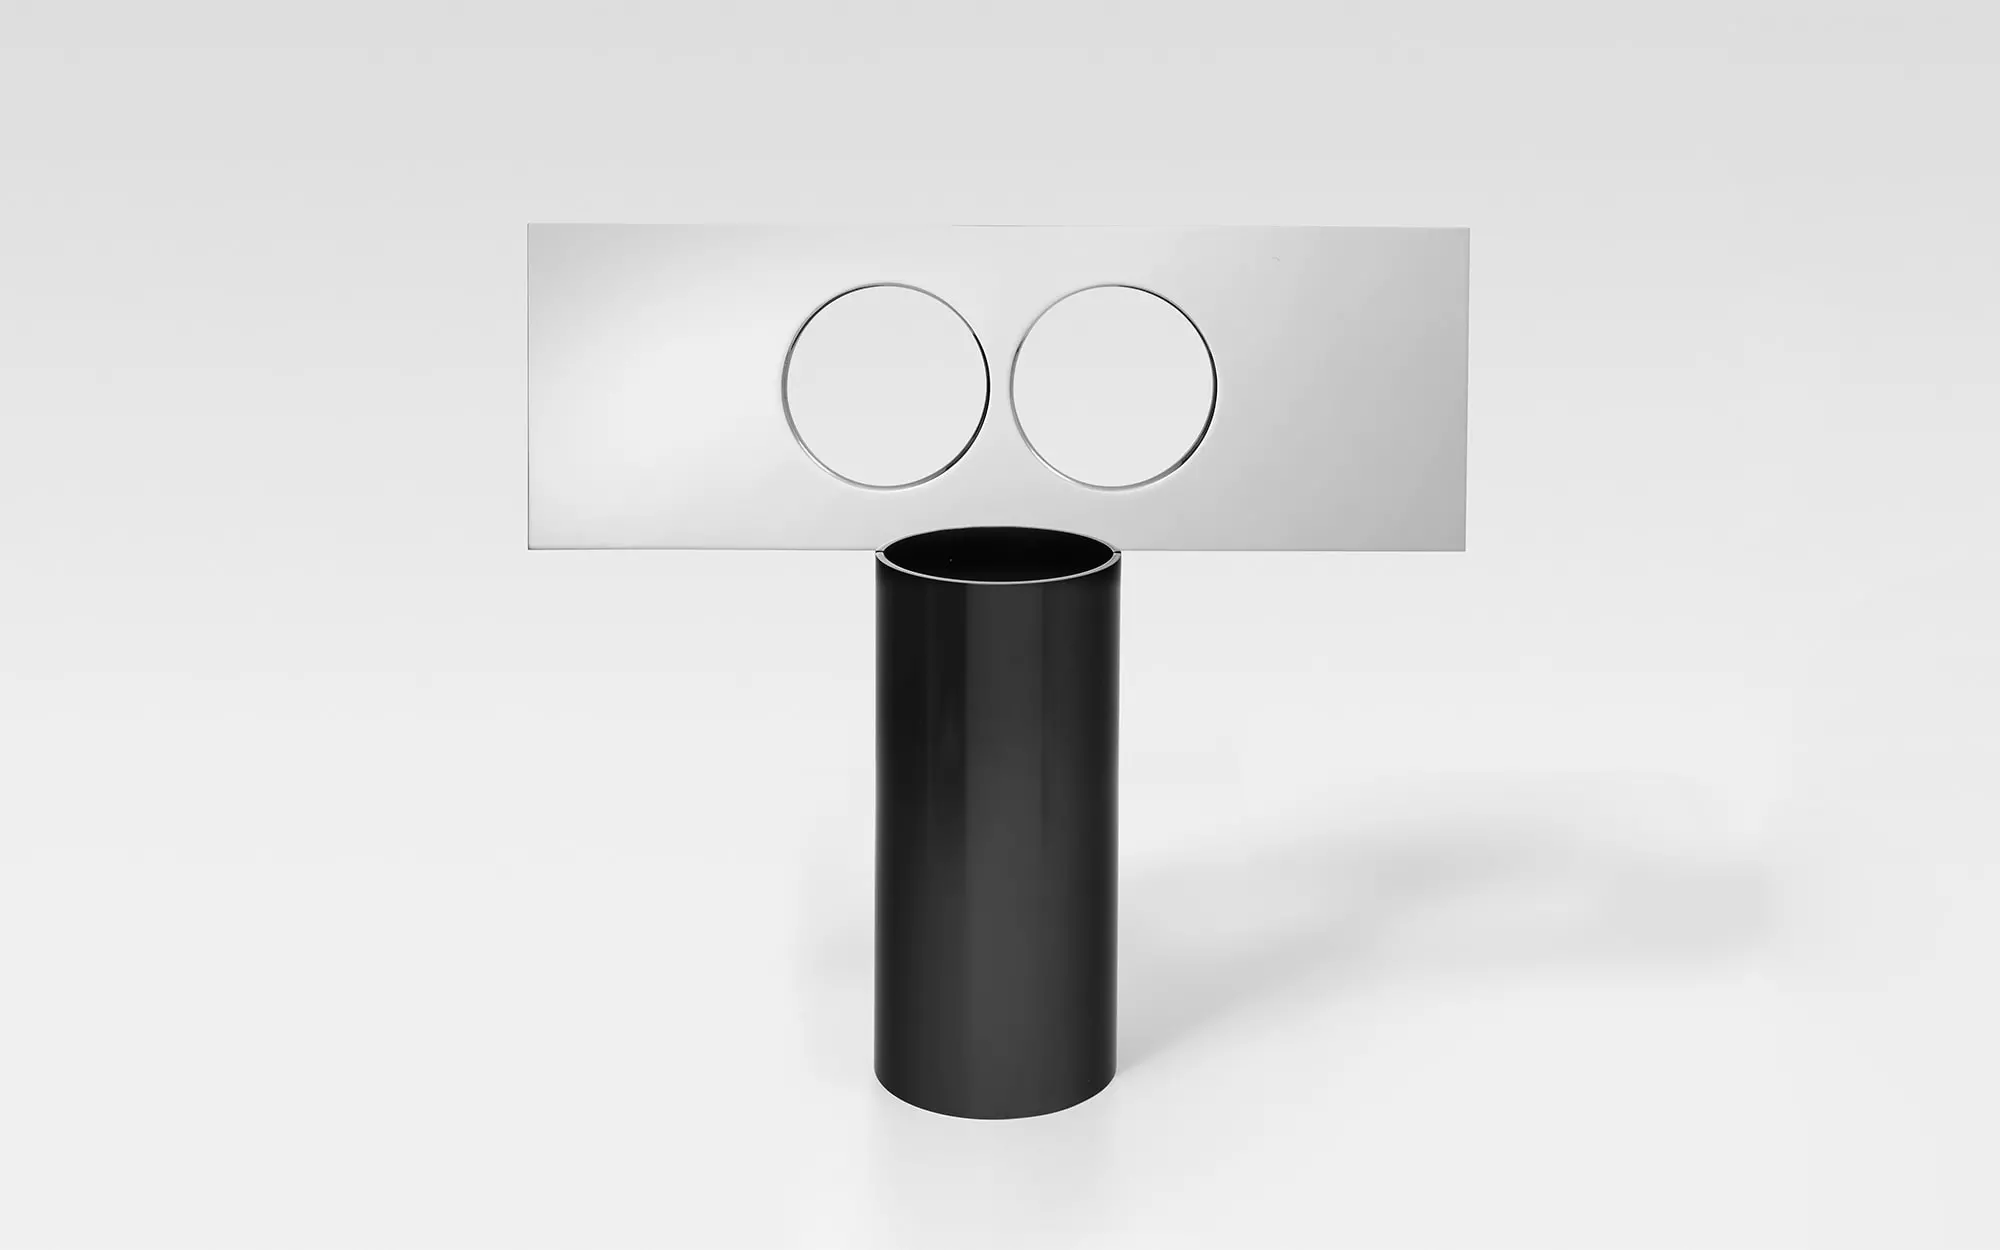 Lunettes - 2 Vase - Pierre Charpin - Art and Drawing - Galerie kreo